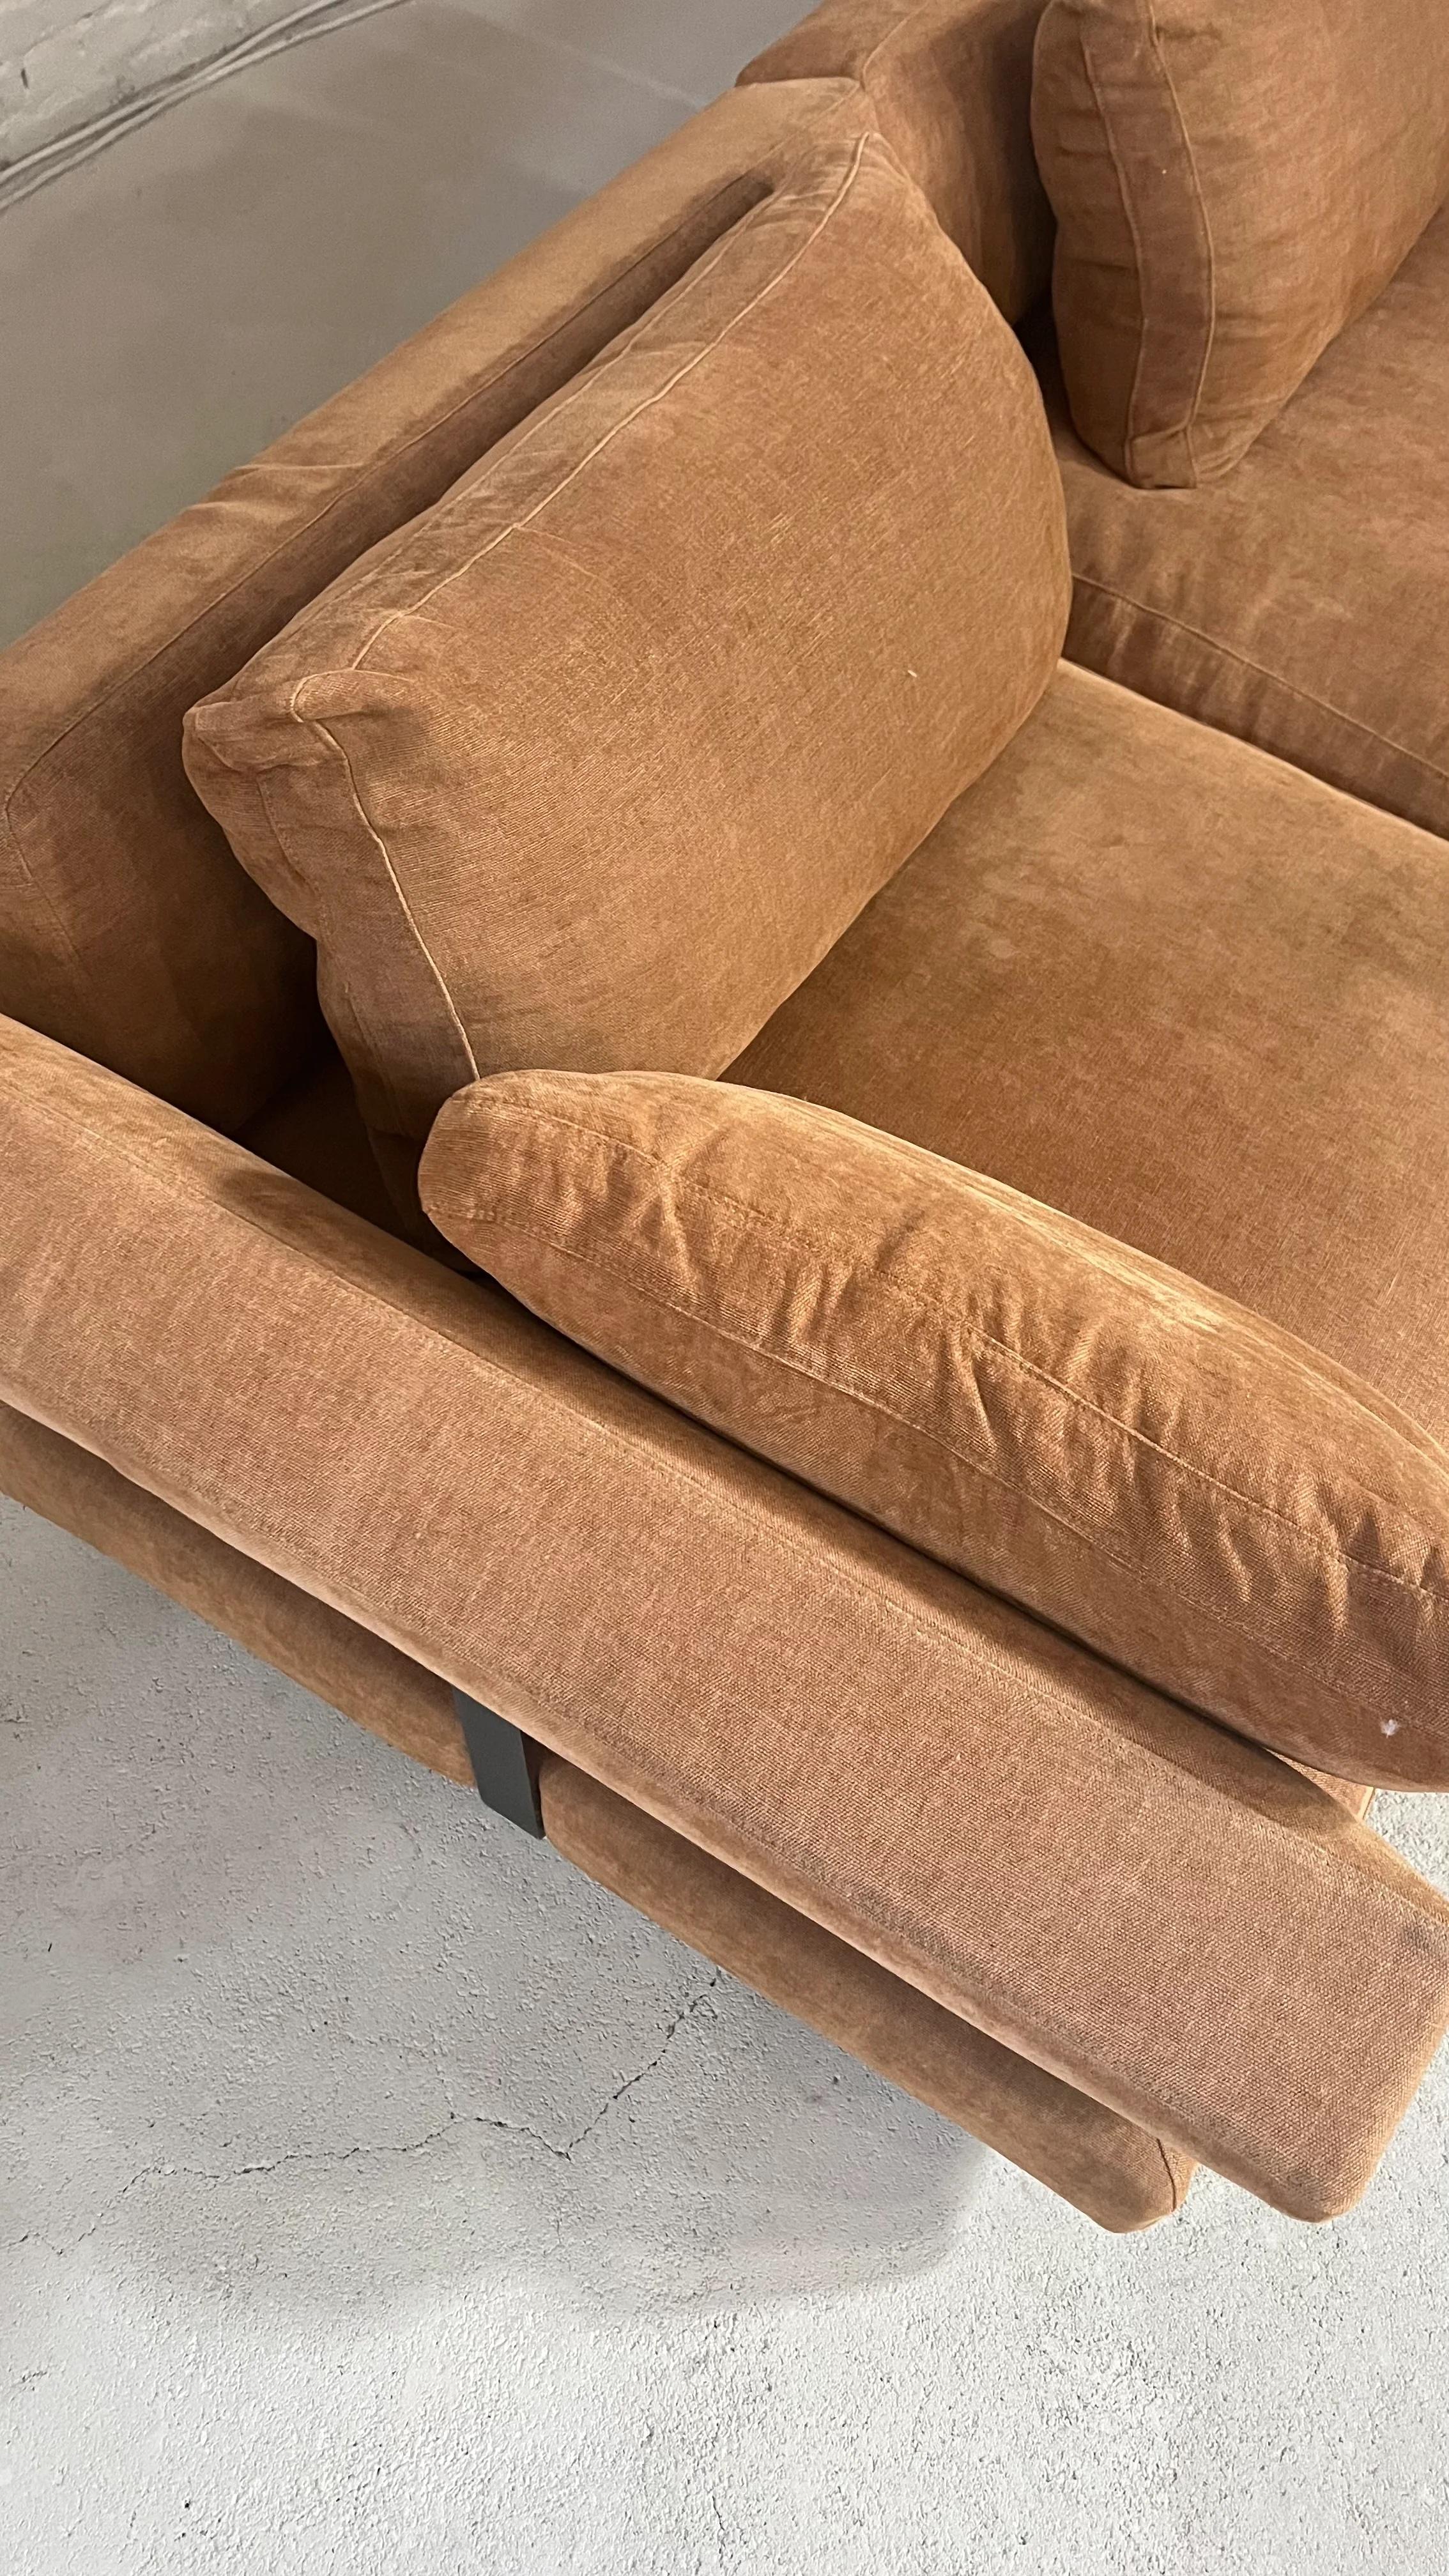 This 3 piece modular corner sofa was designed for Flexform in 2020 by the iconic Italian designer Antonio Citterio. The sofa was used in a fashion-house boardroom and therefor the state is excellent.

Outstanding comfort was designed right into the